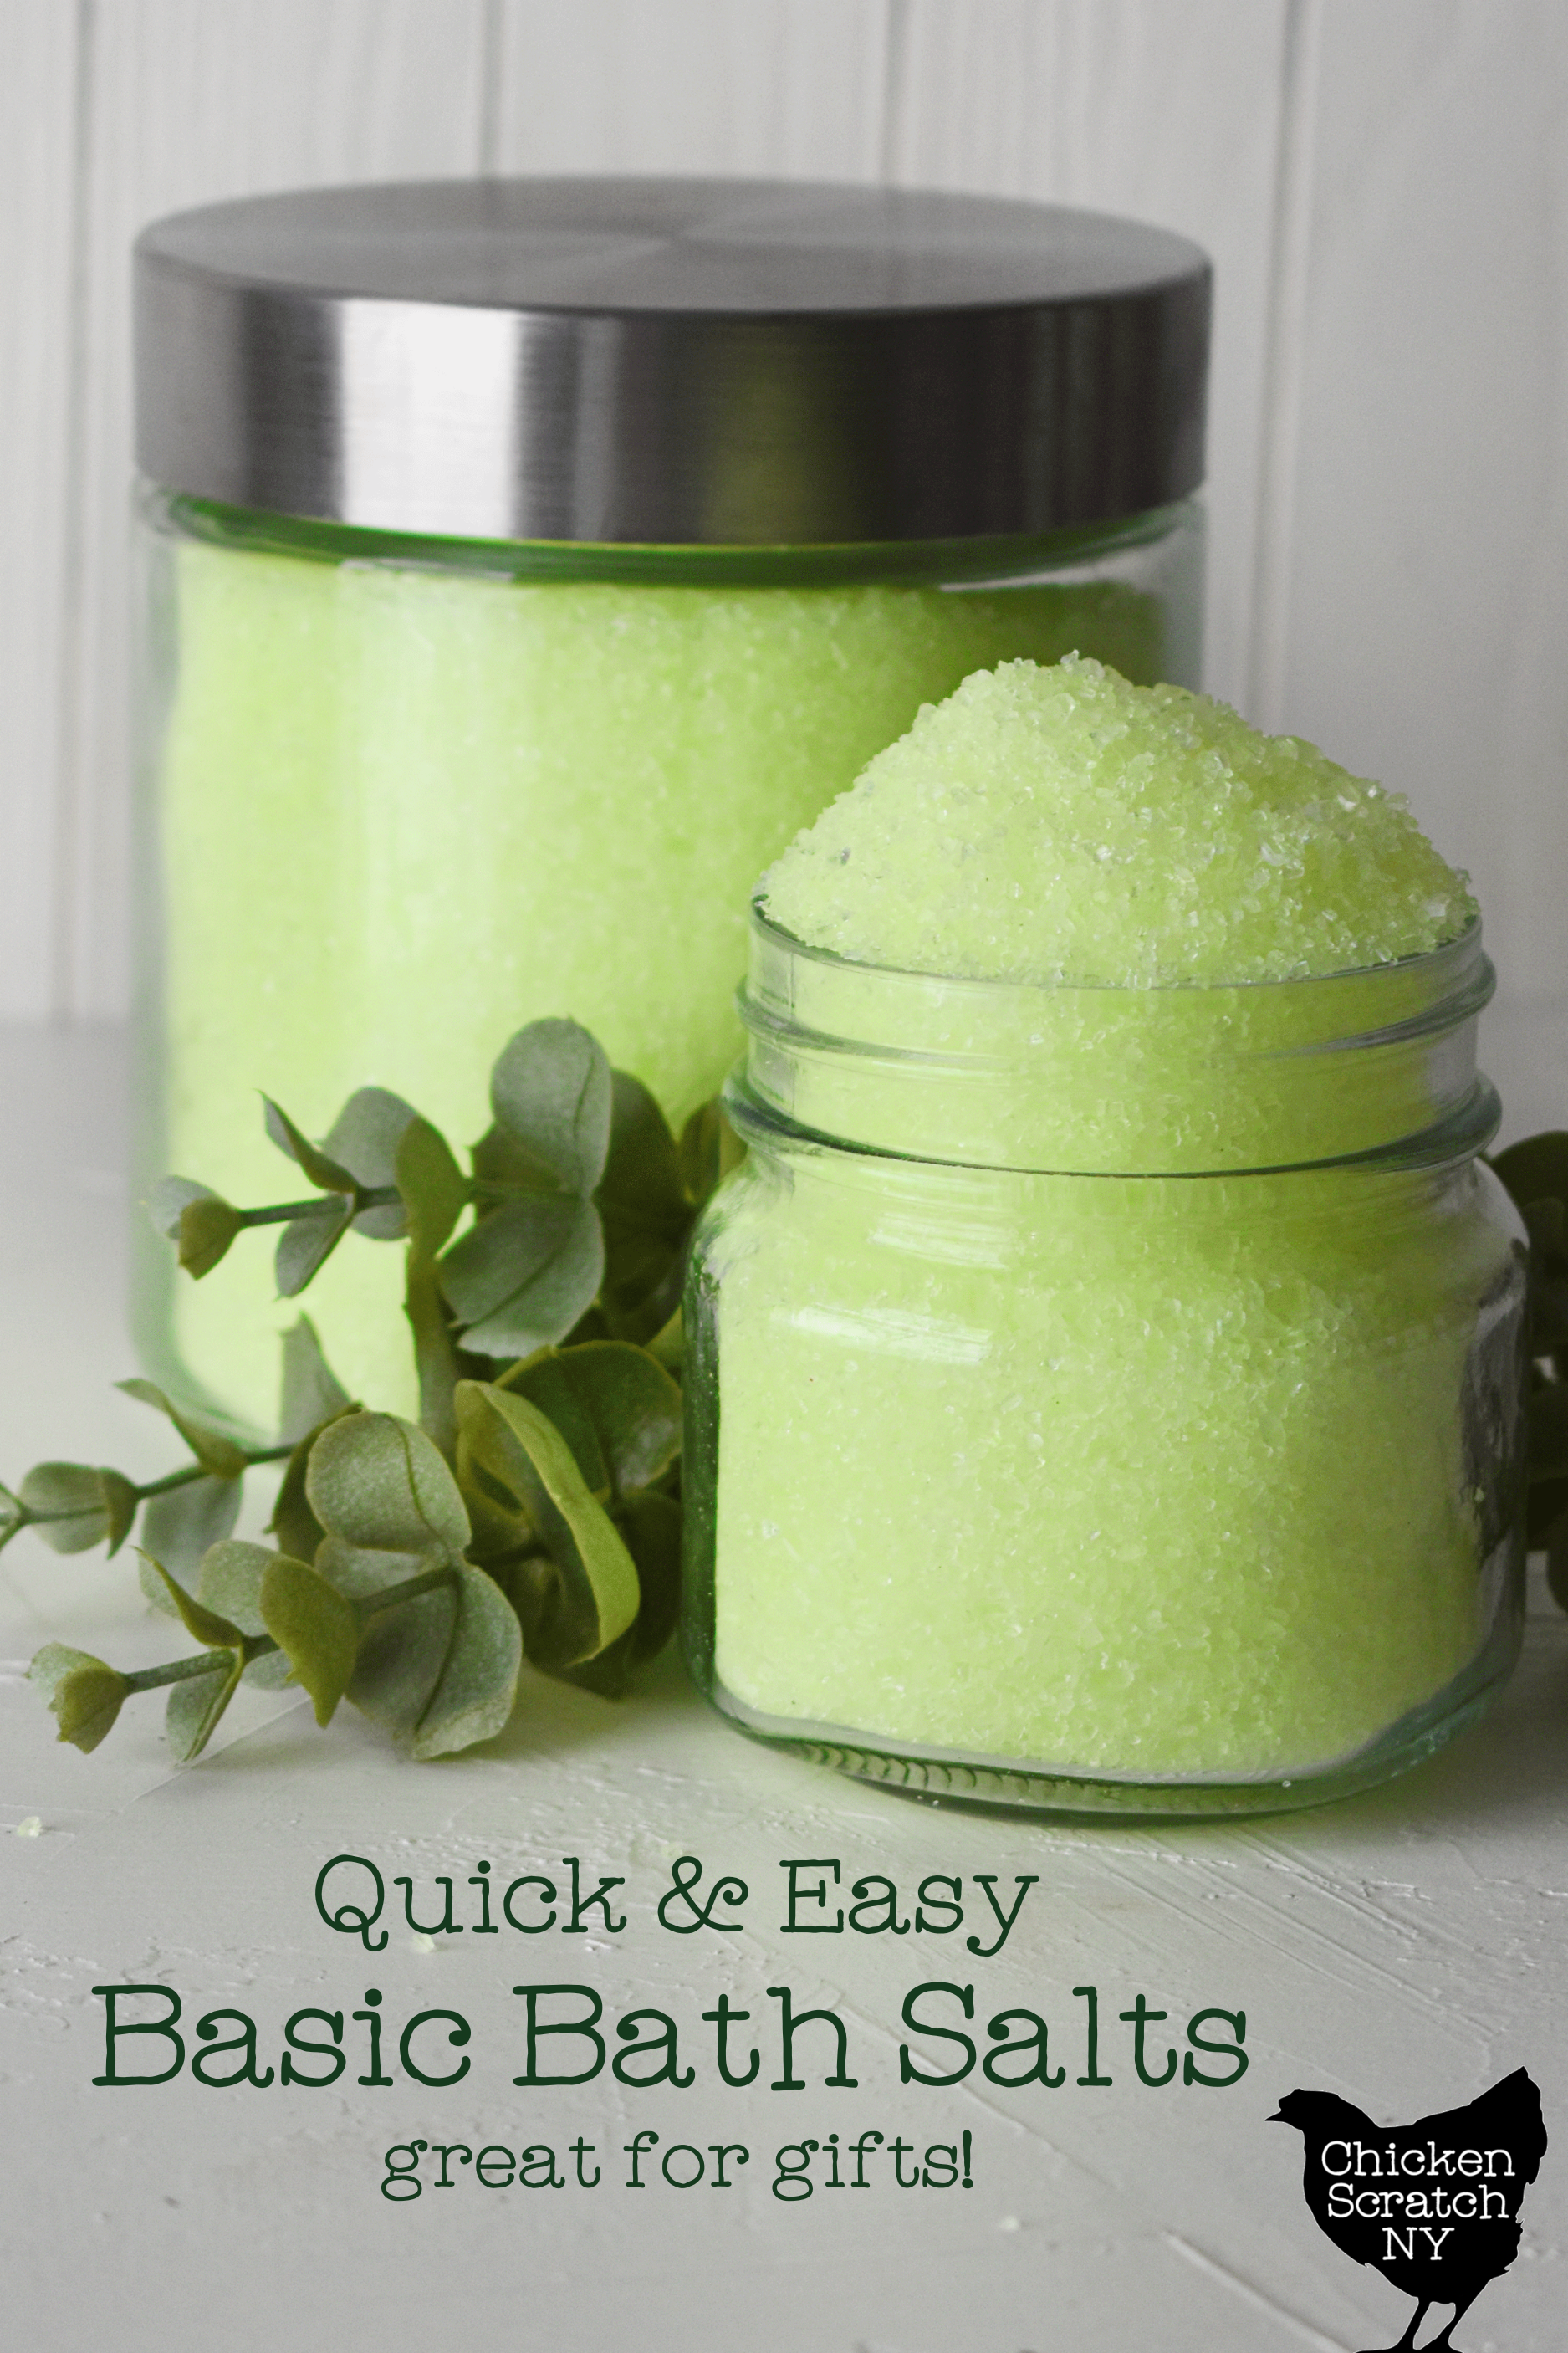 two glass jars holding lime green bath salts on a white surface